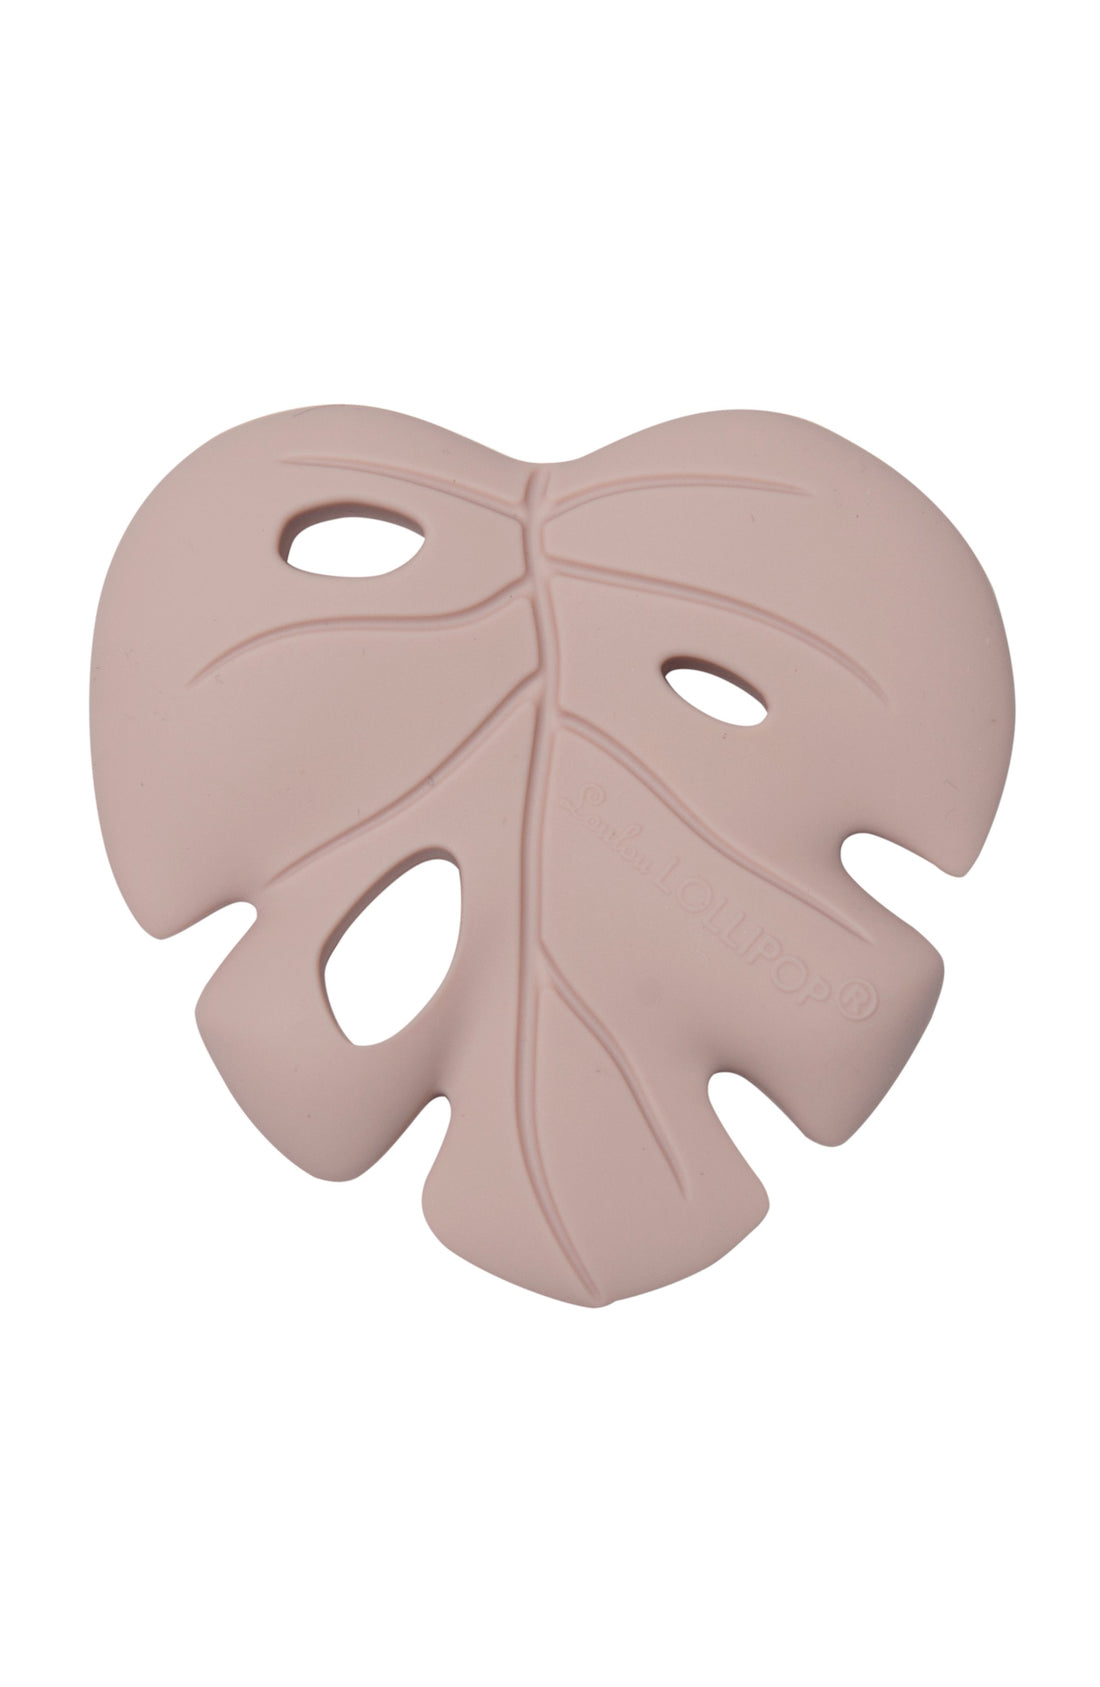 Monstera Silicone Teether Grow Loulou Lollipop Pink 